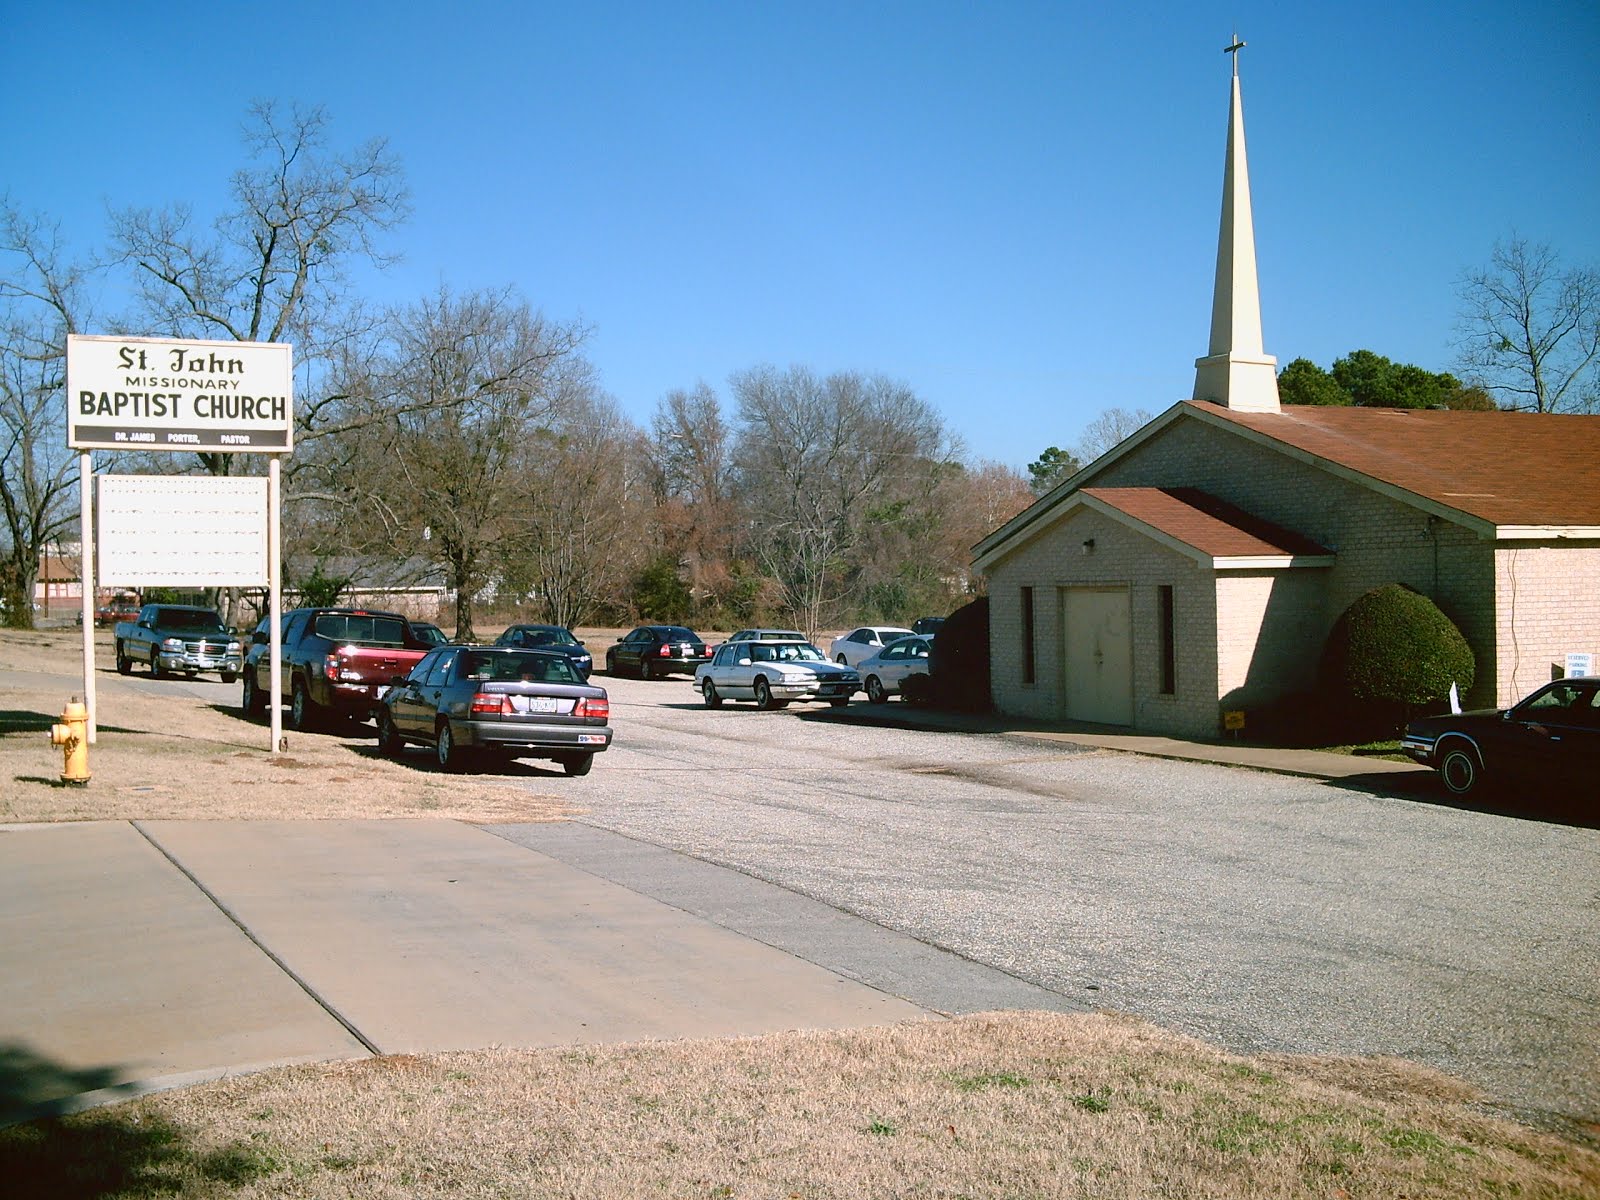 St. John Missionary Baptist Church Longview Texas (Click picture to visit FB page)